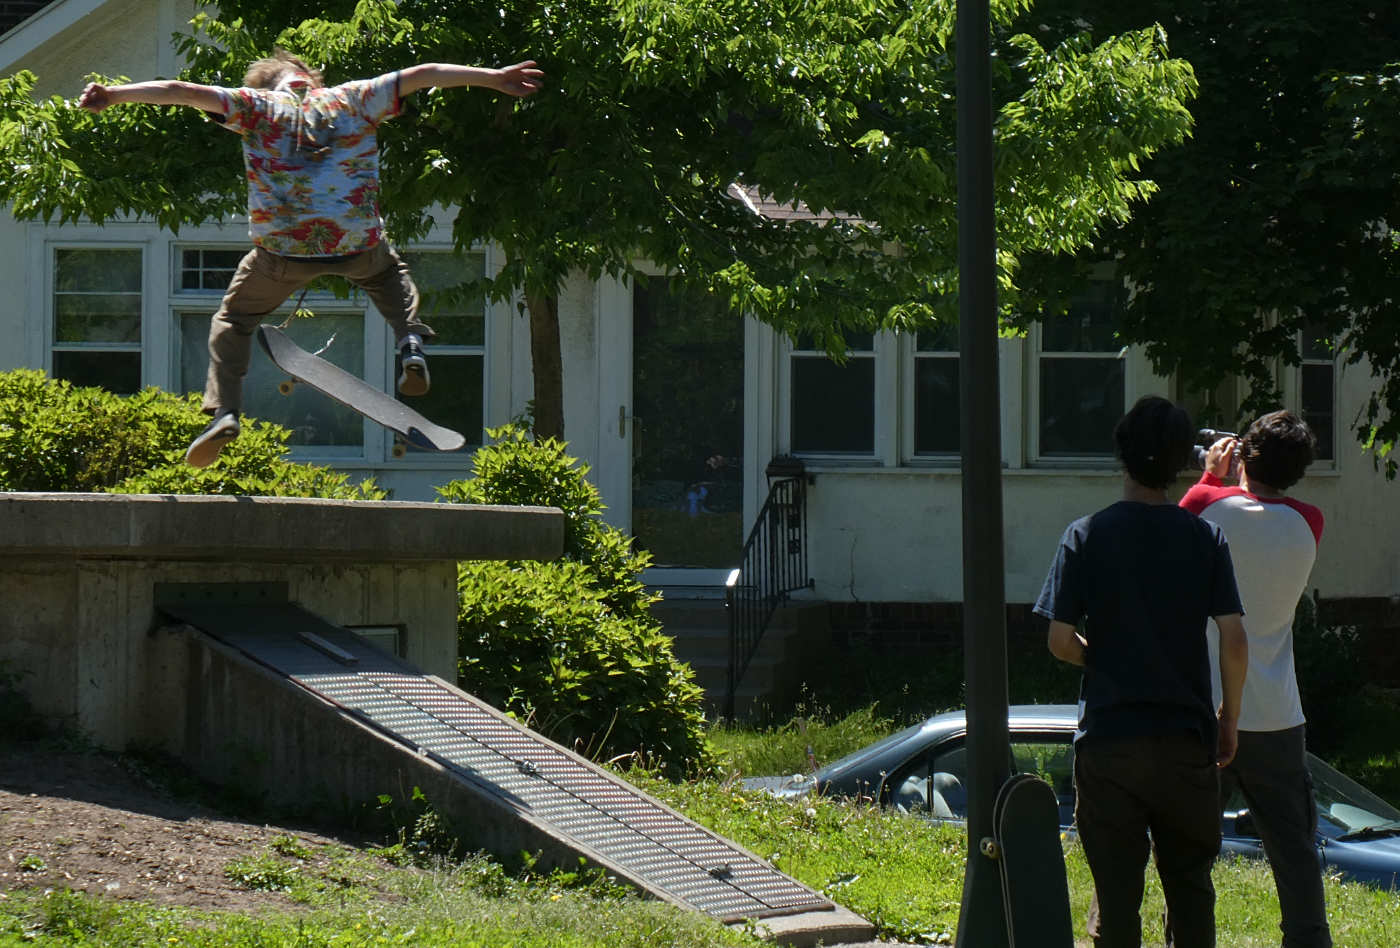 A skateboarding young man is in midair, arms outstretched, skateboard flipped sideways underfoot, above a narrow cement ramp down to the ground, as two companions watch, and one is holding a video camera